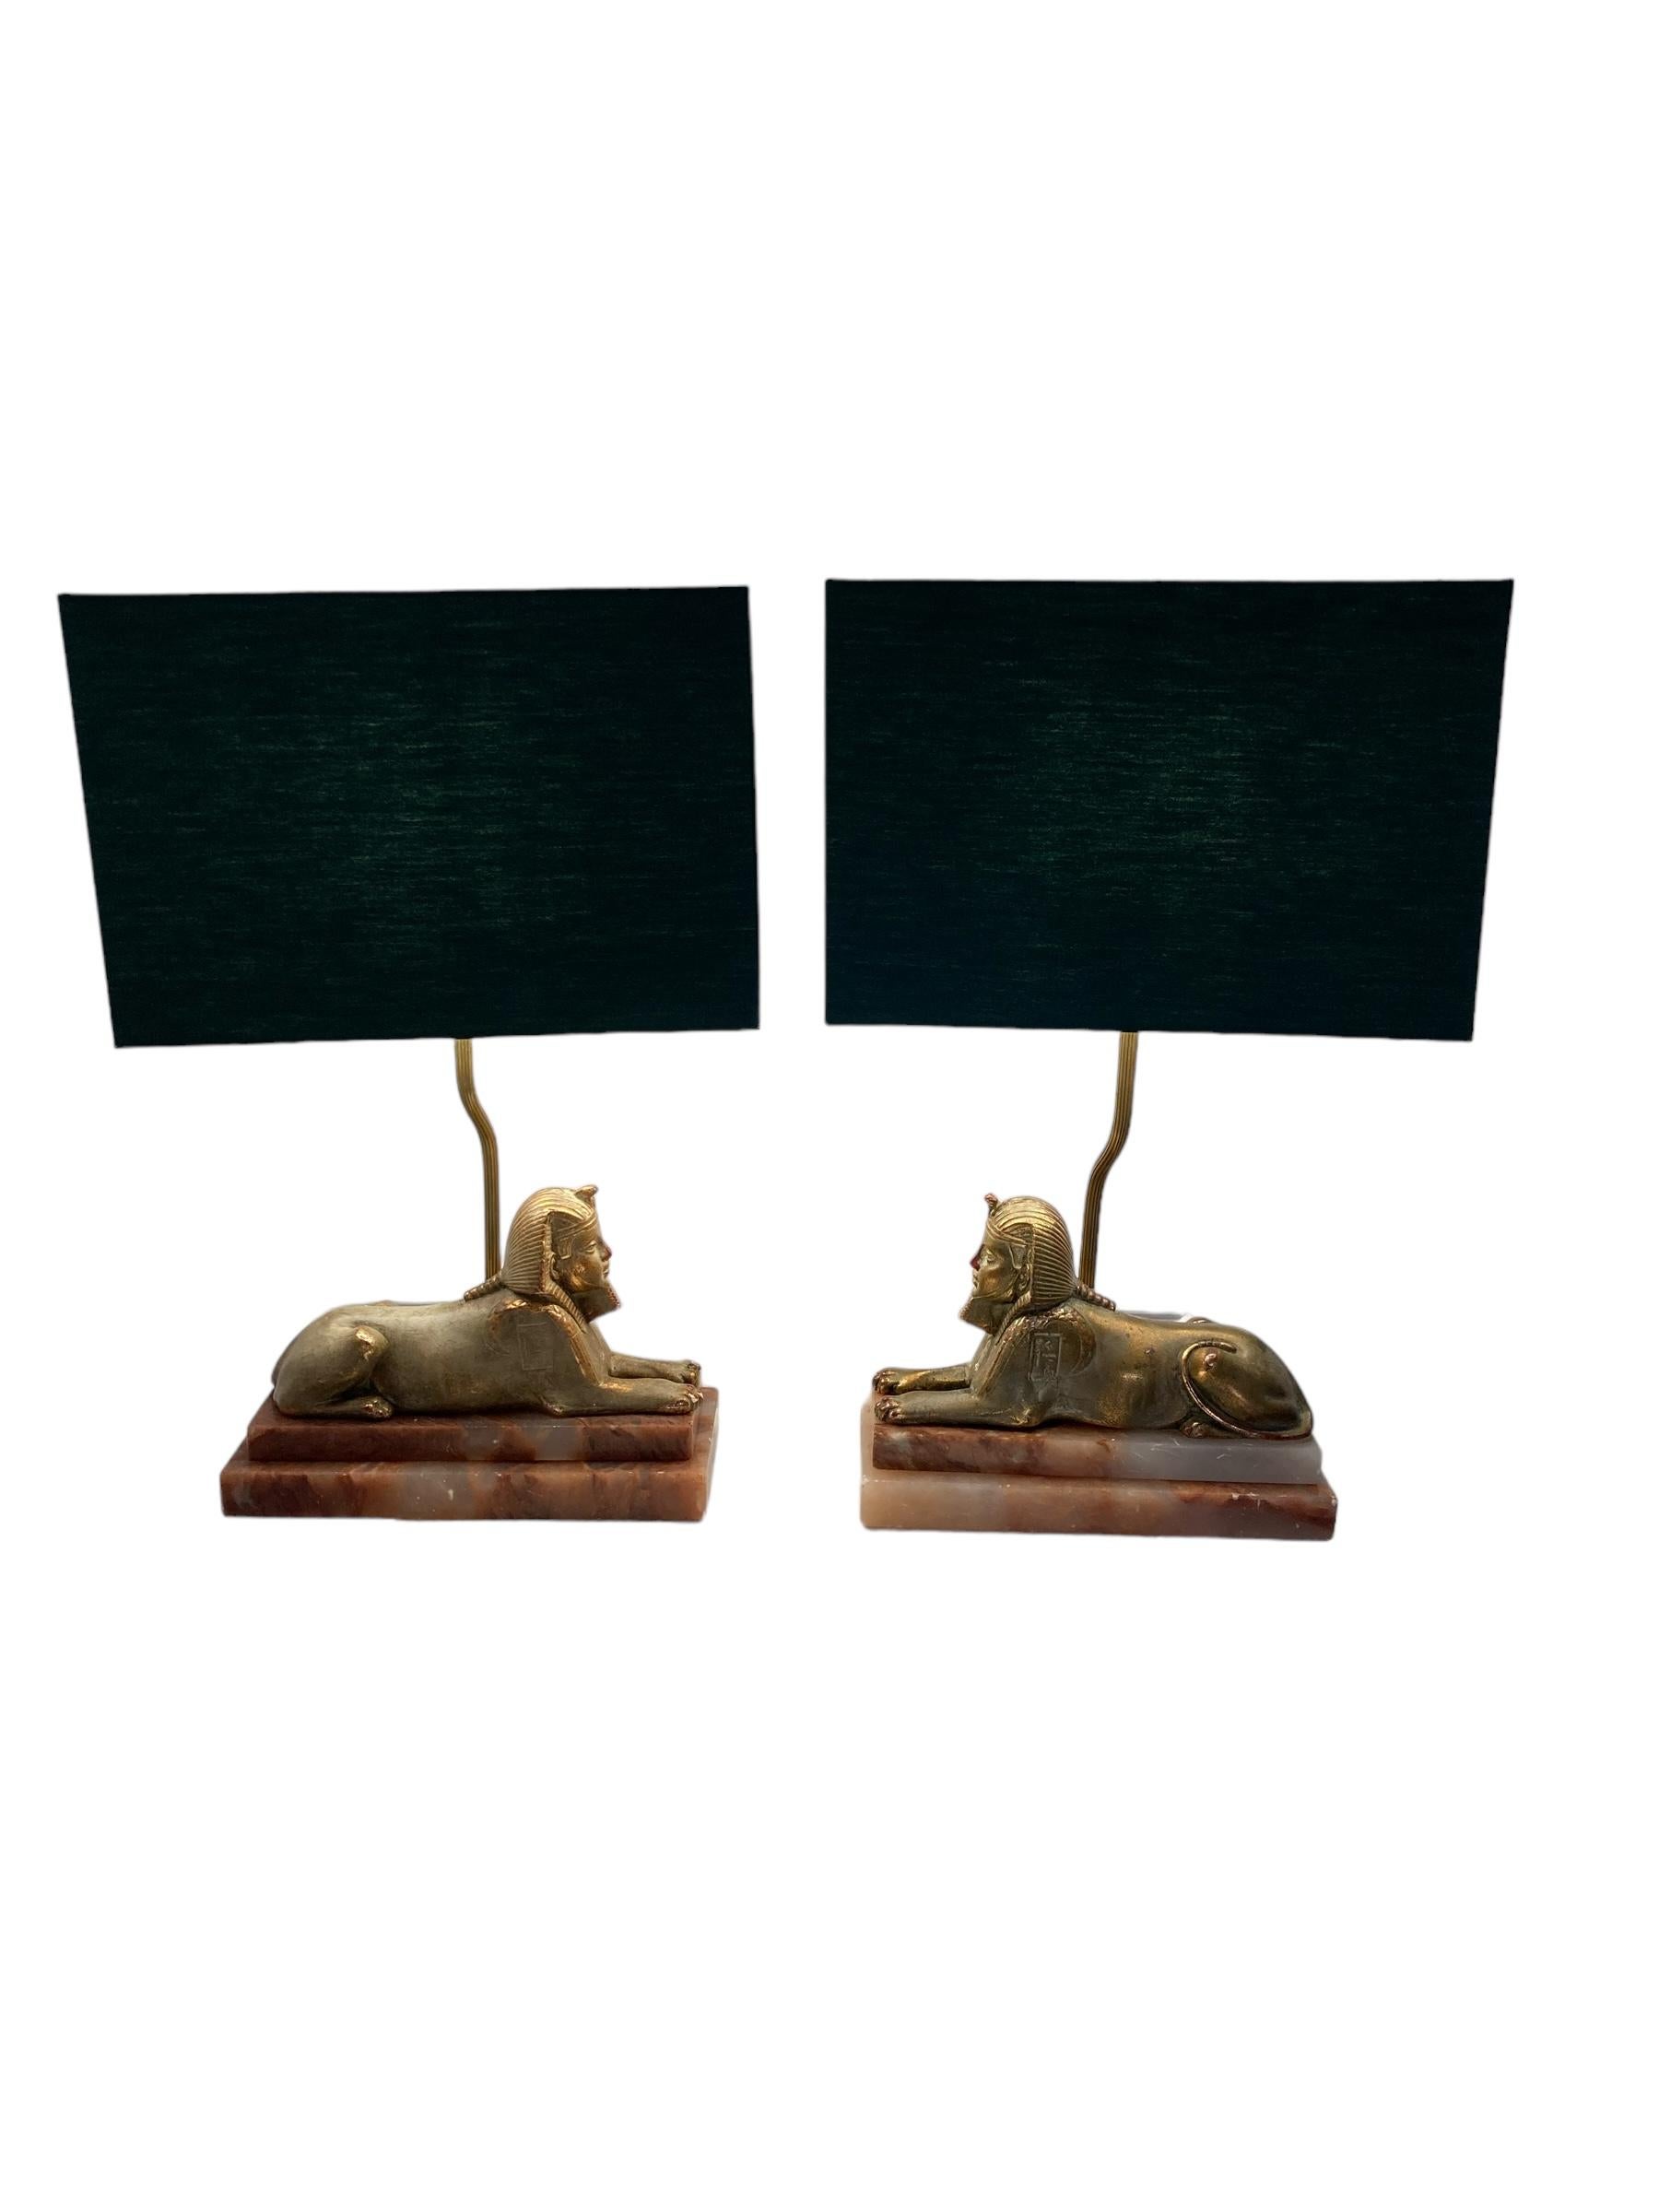 Pair of Art Deco Egytian Sphinx style Table Lamps on a Marble Base Dark Green Shades.  Crafted with meticulous attention to detail, this lamp effortlessly combines elegance and strength. beautifully sculpted, add a touch of regal charm to any space.